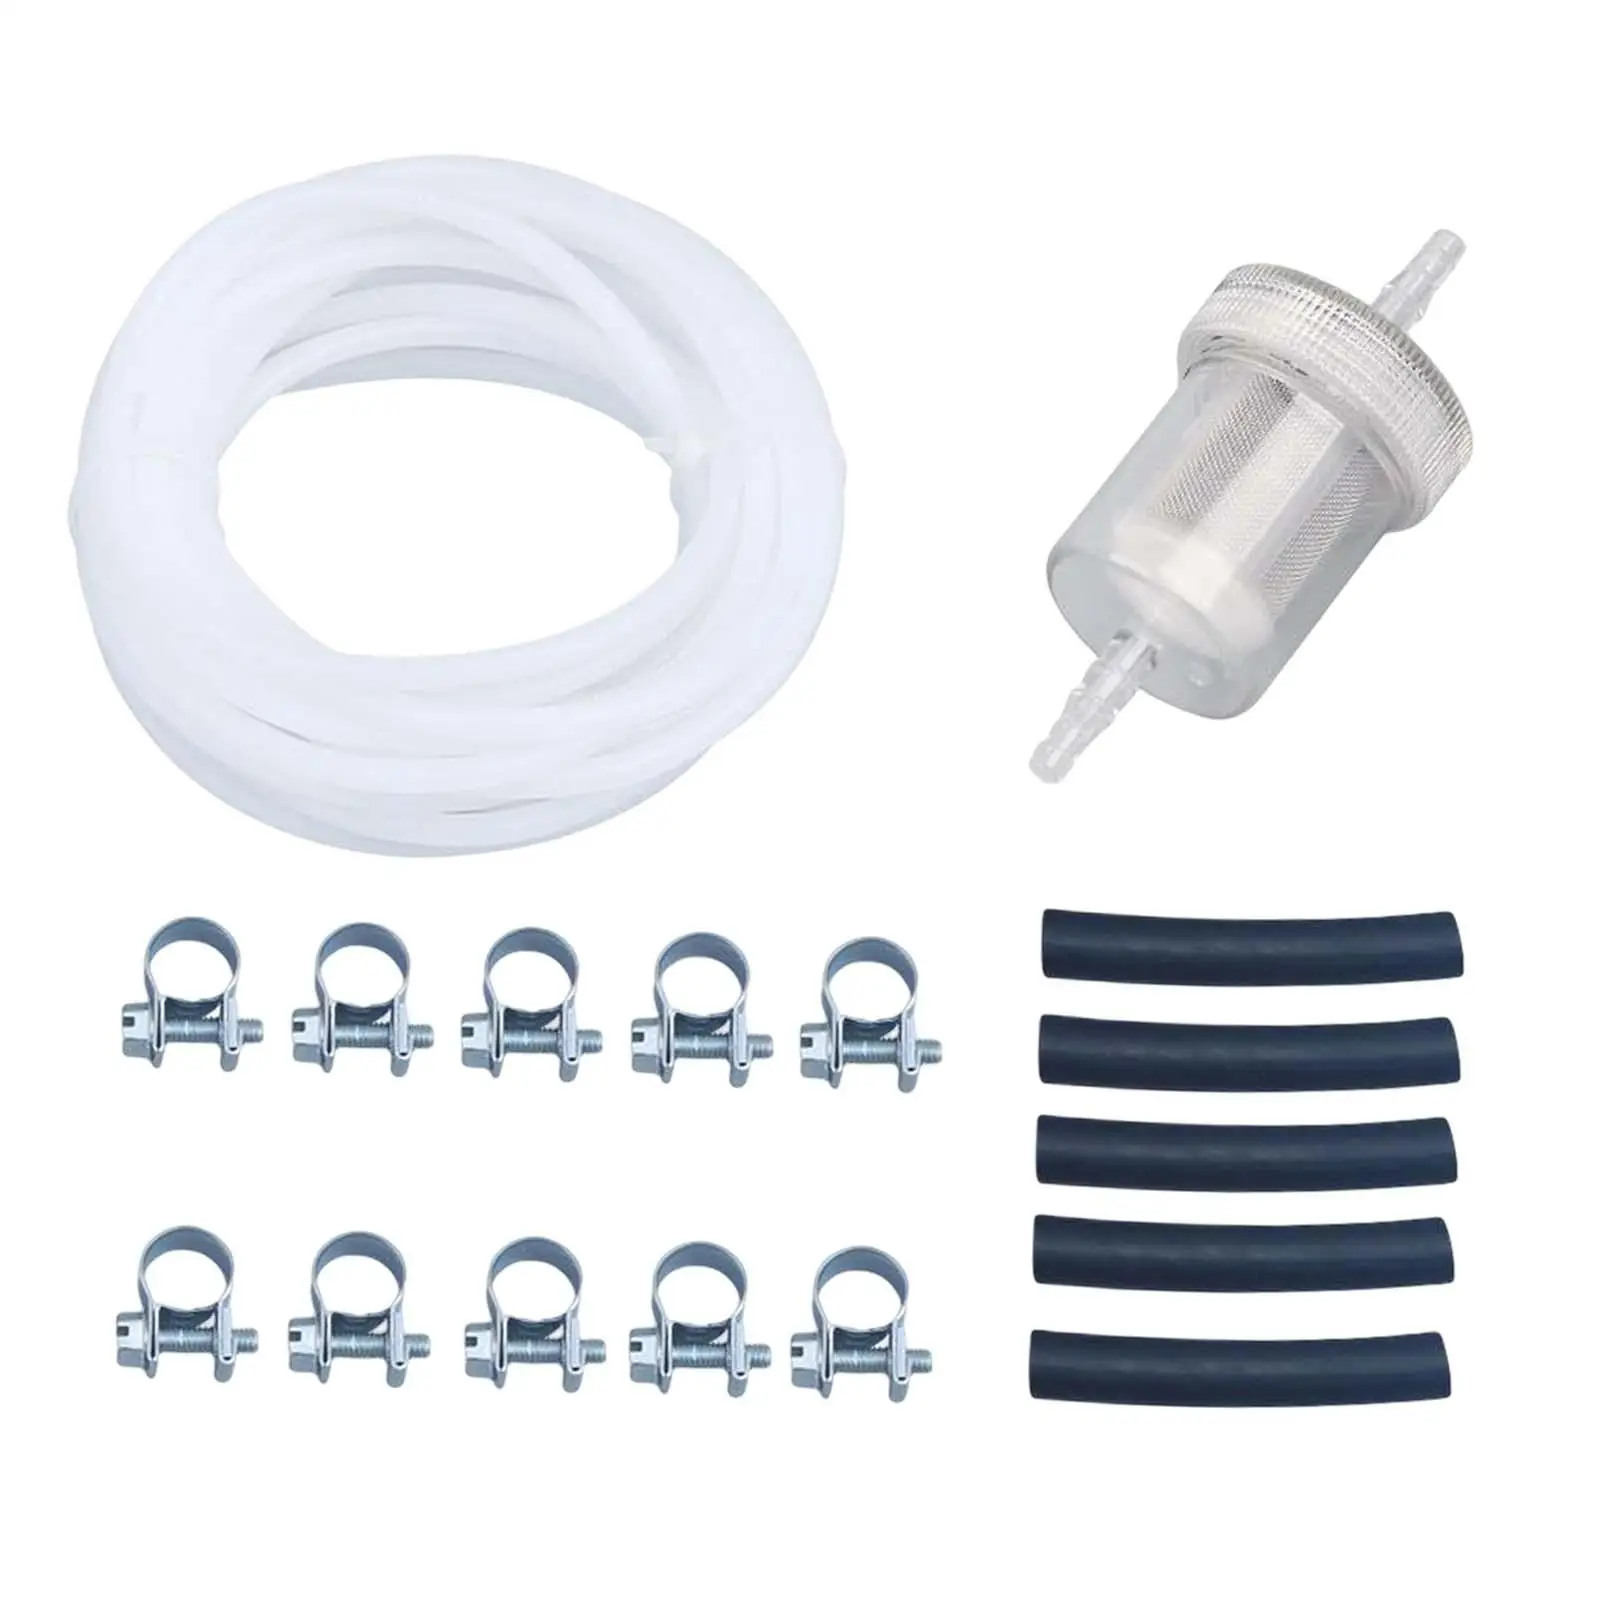 Fuel Pipe Line Hose Clip Kit for Eberspacher Heater Tank Easily Install